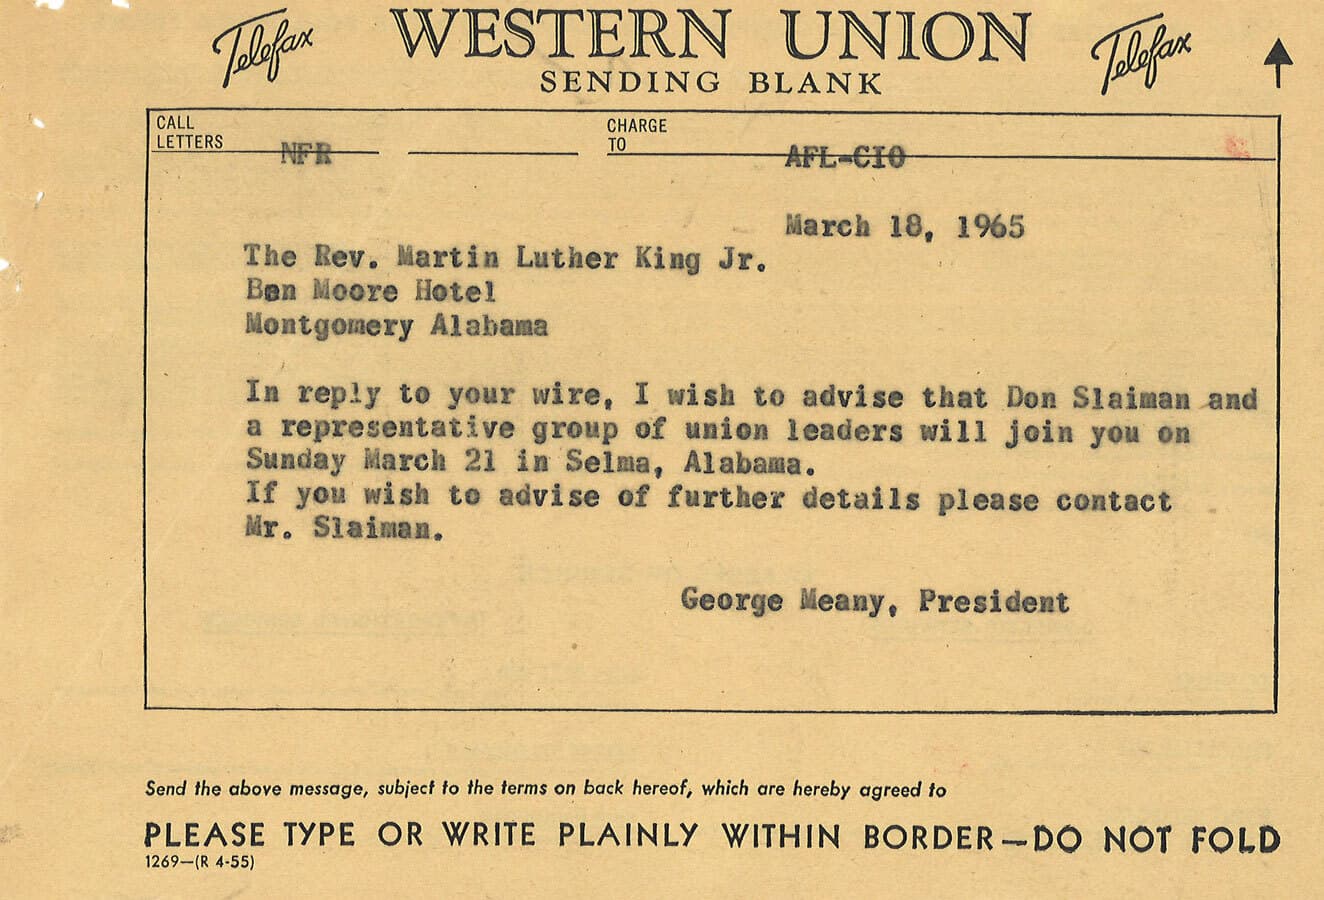 A telegram to Martin Luther King Jr. advising him that Don Slaiman and other union leaders would join him in Selma, Alabama